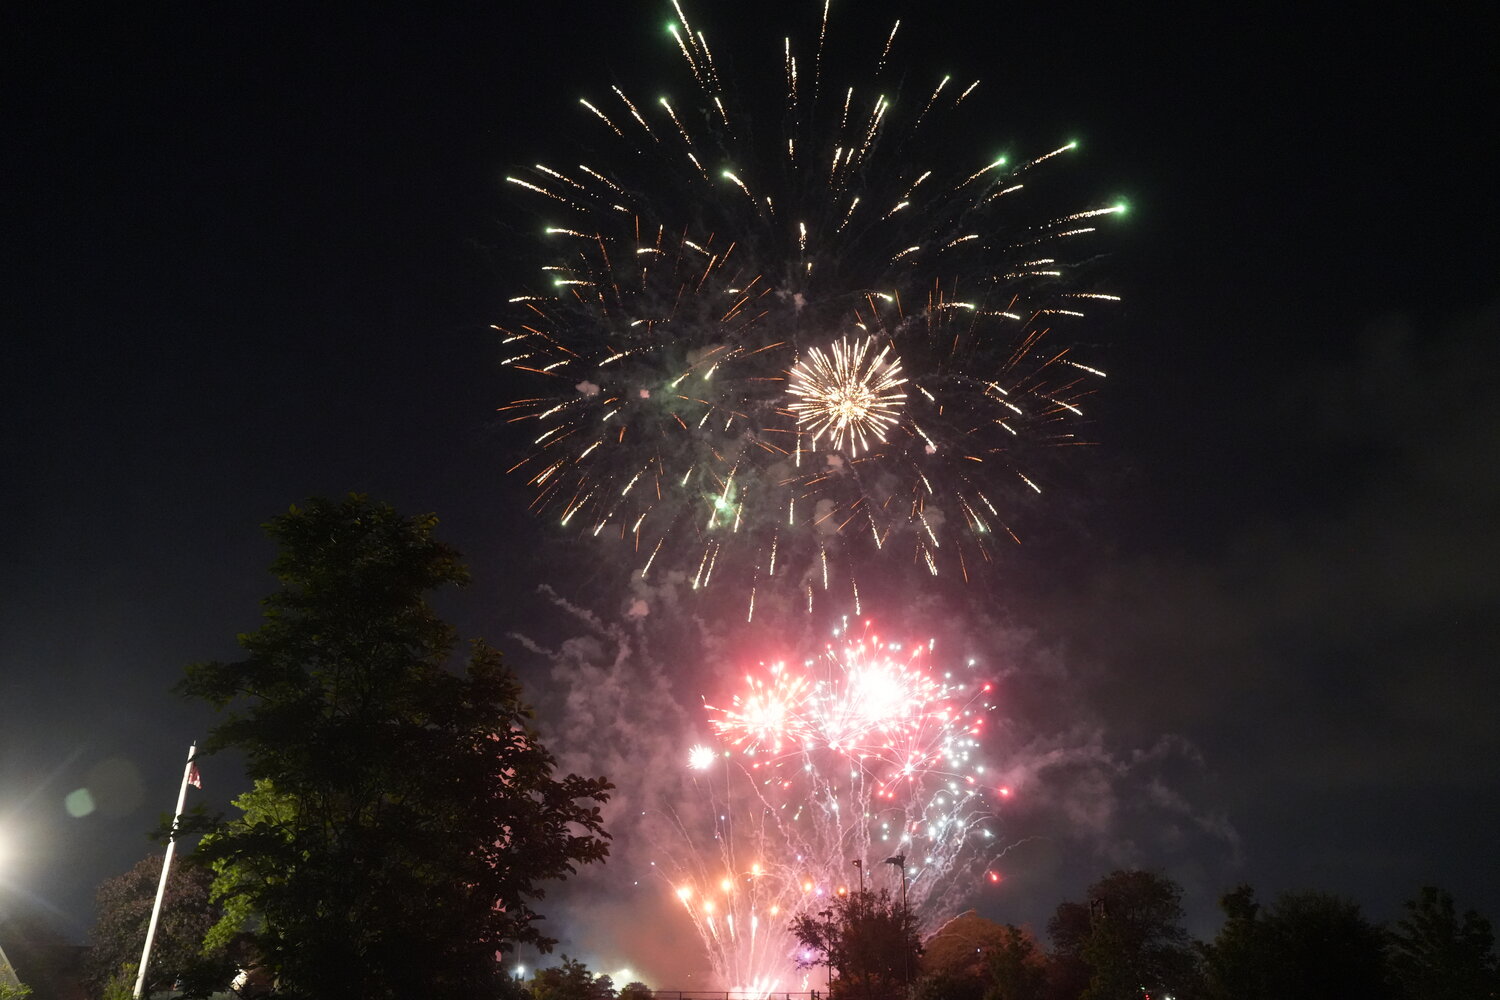 Fireworks by Grucci have been putting on the annual fireworks celebration and concert in Rockville Centre since 1993.